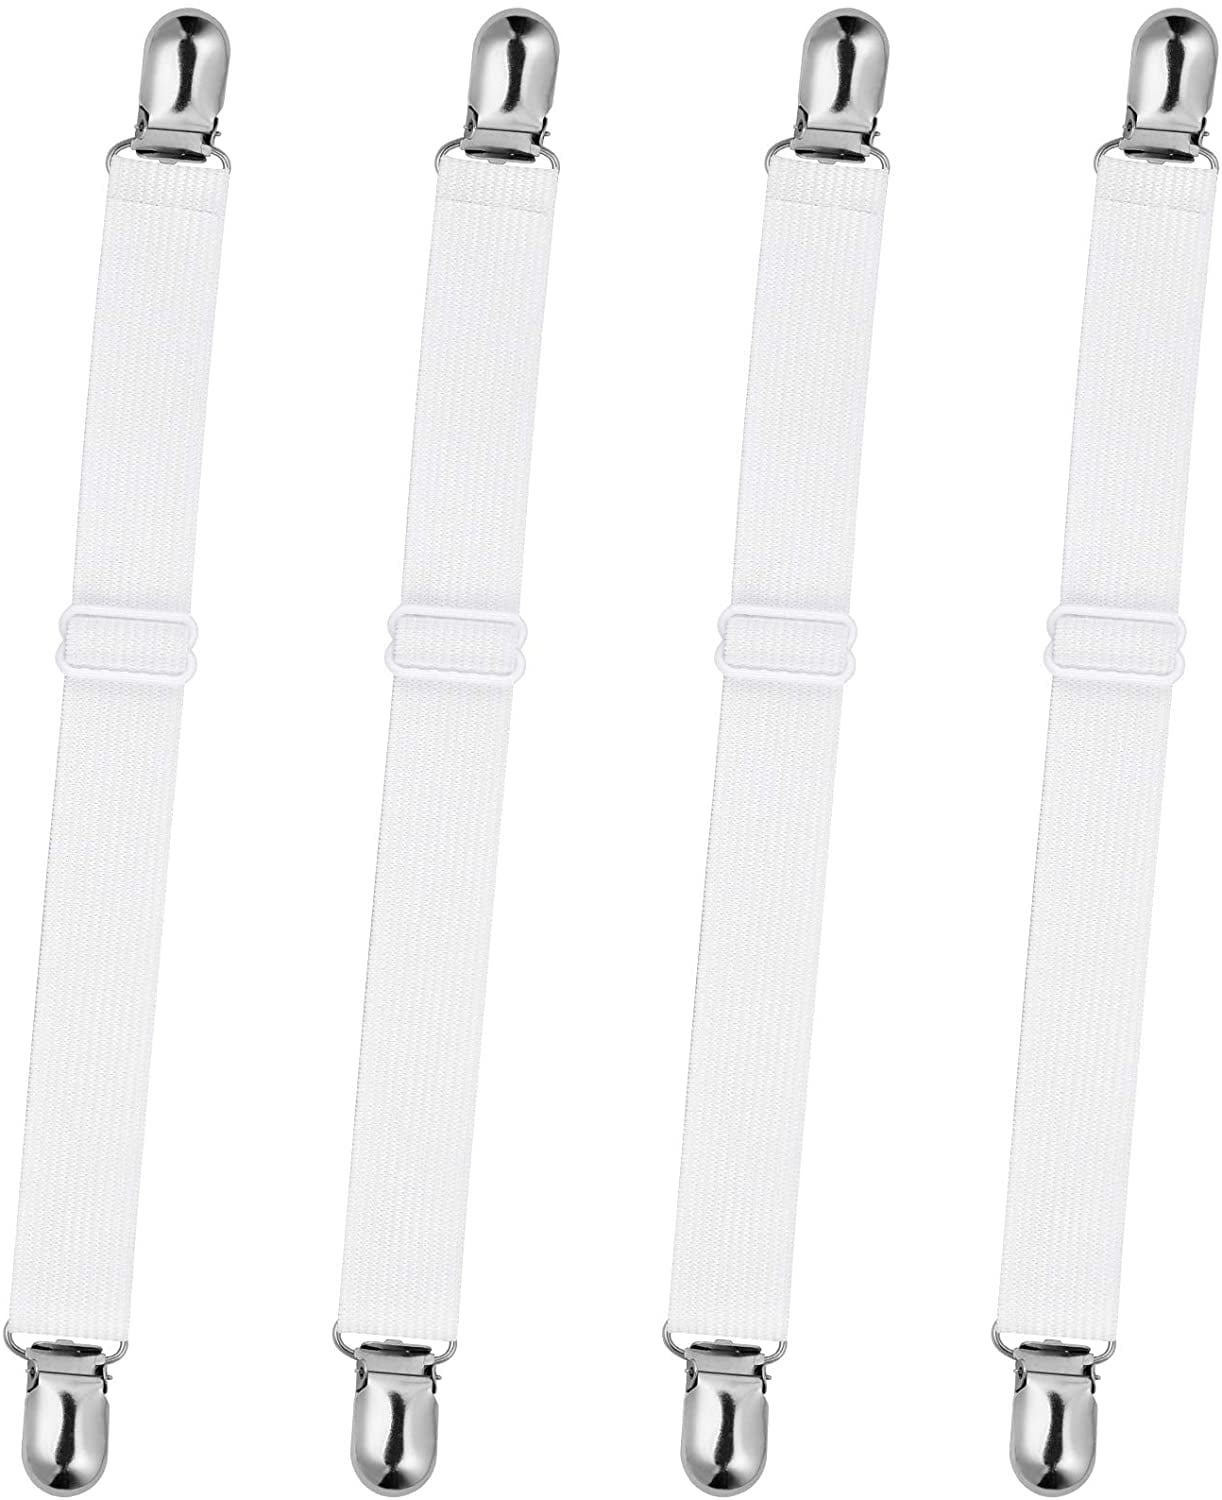 Korlon 4 Pack Bed Sheet Clips, Adjustable Heavy Duty Fitted Sheet Straps  Clips, Elastic Sheet Suspenders Fasteners for Bed Mattress Cover Sofa  Cushion